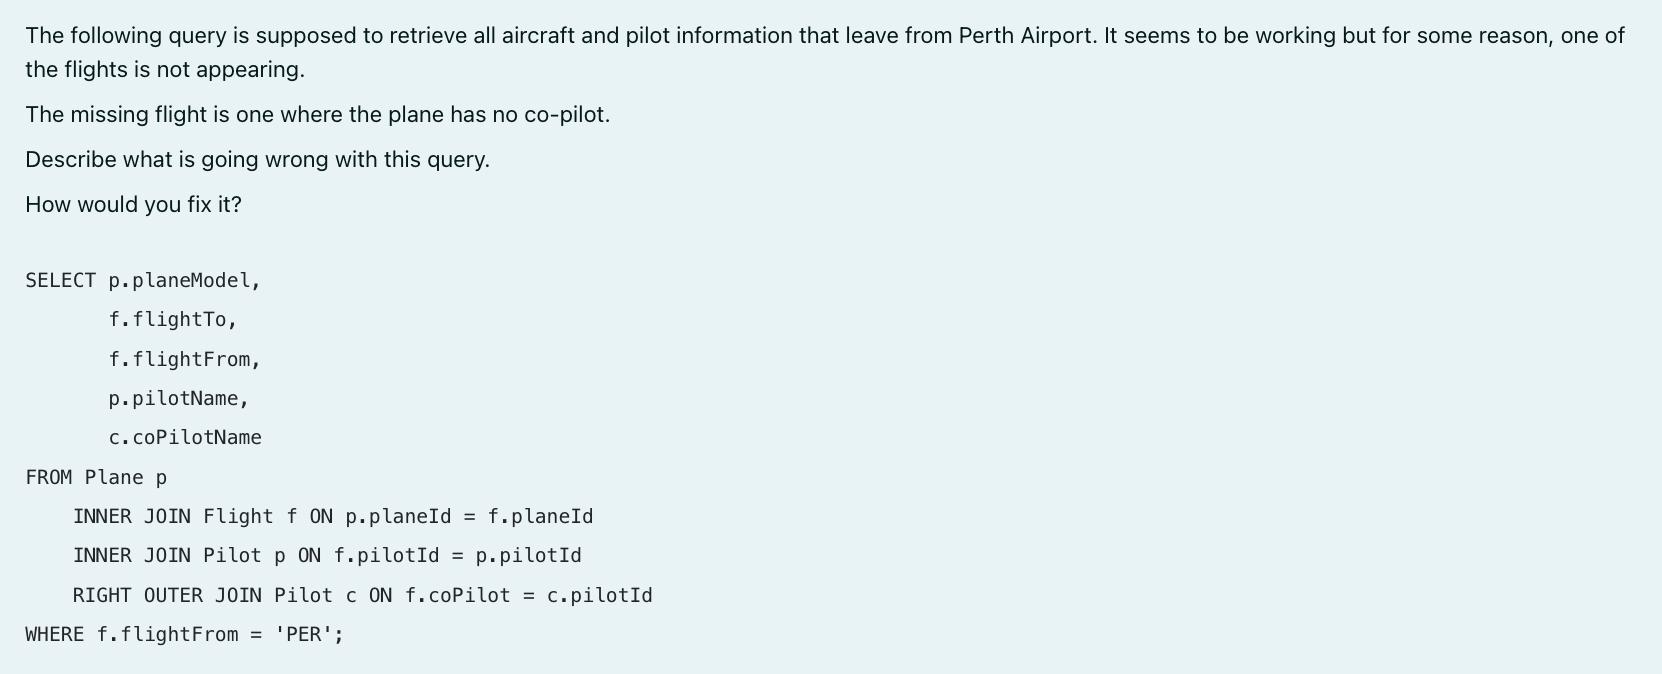 The following query is supposed to retrieve all aircraft and pilot information that leave from Perth Airport.